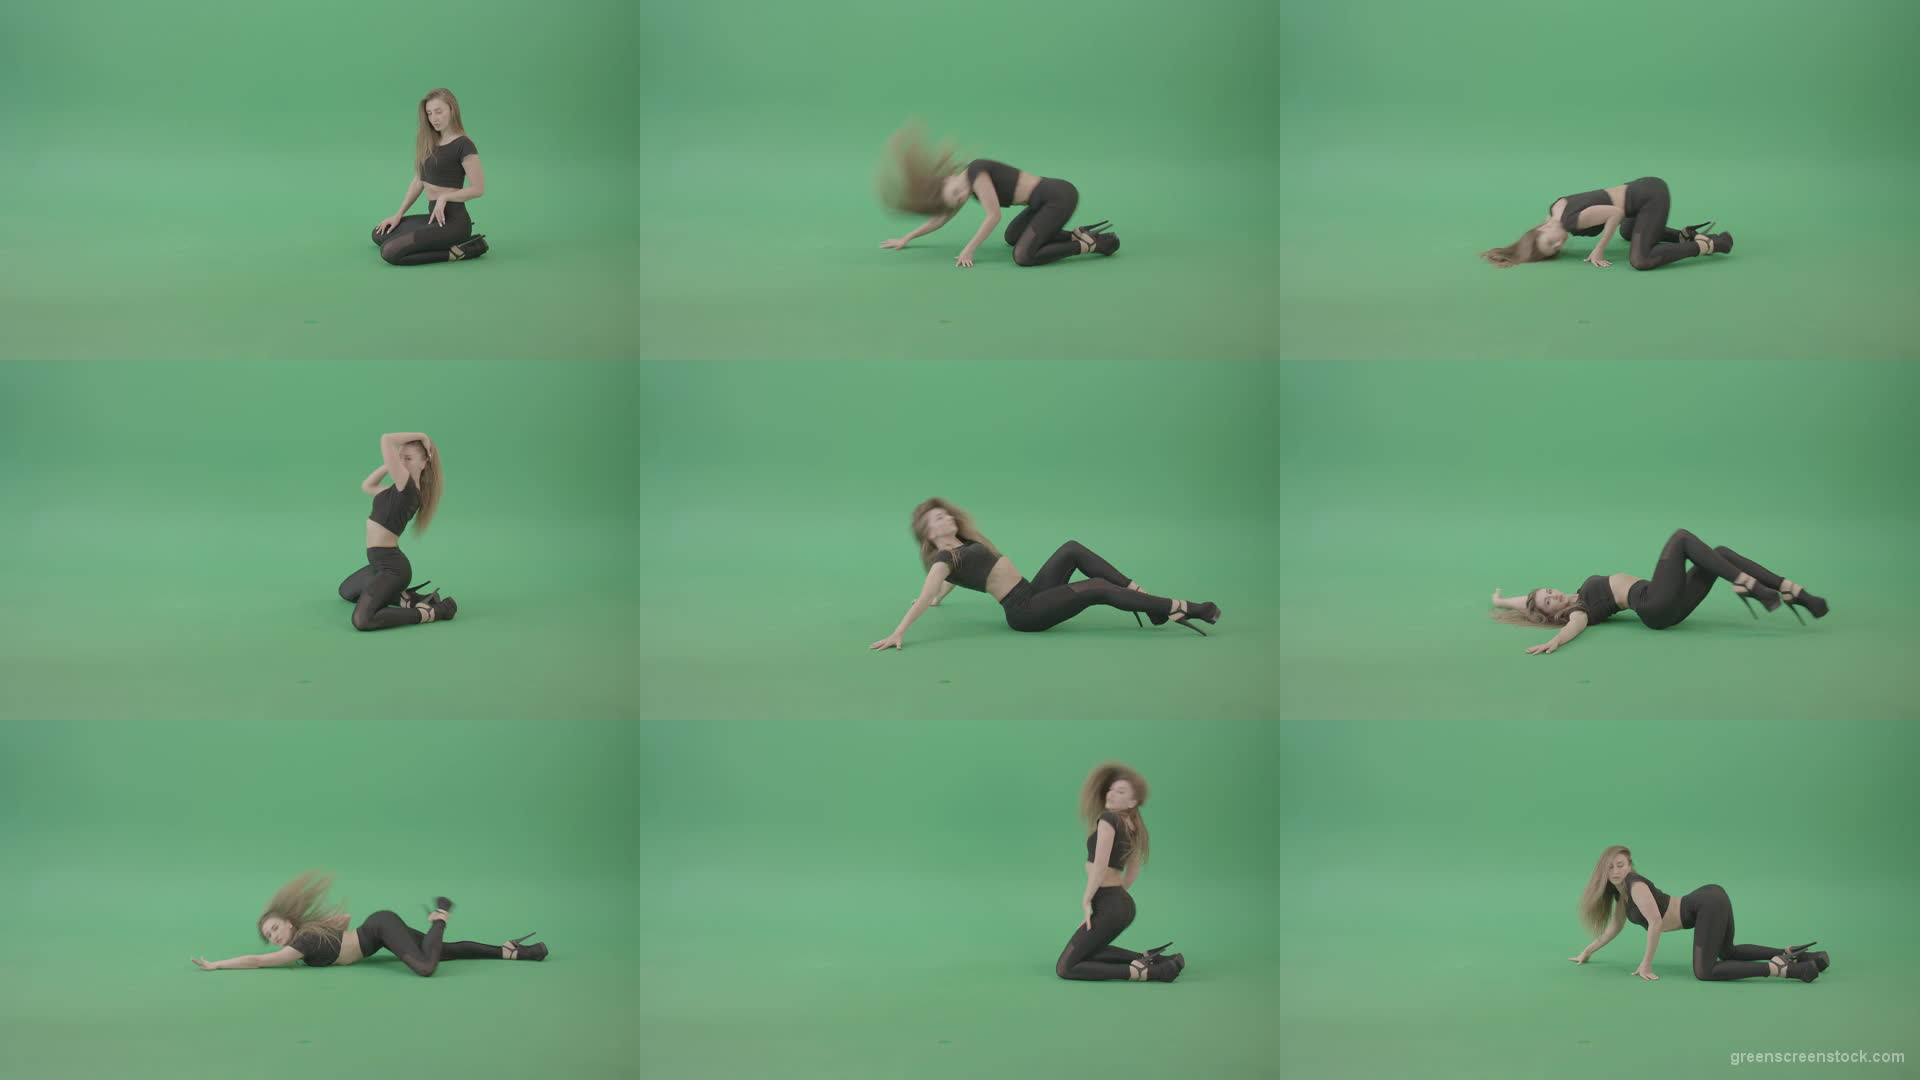 Exotic-erotic-dancing-girl-on-green-screen-play-Doggy-Style-4K-Video-Footage-1920 Green Screen Stock